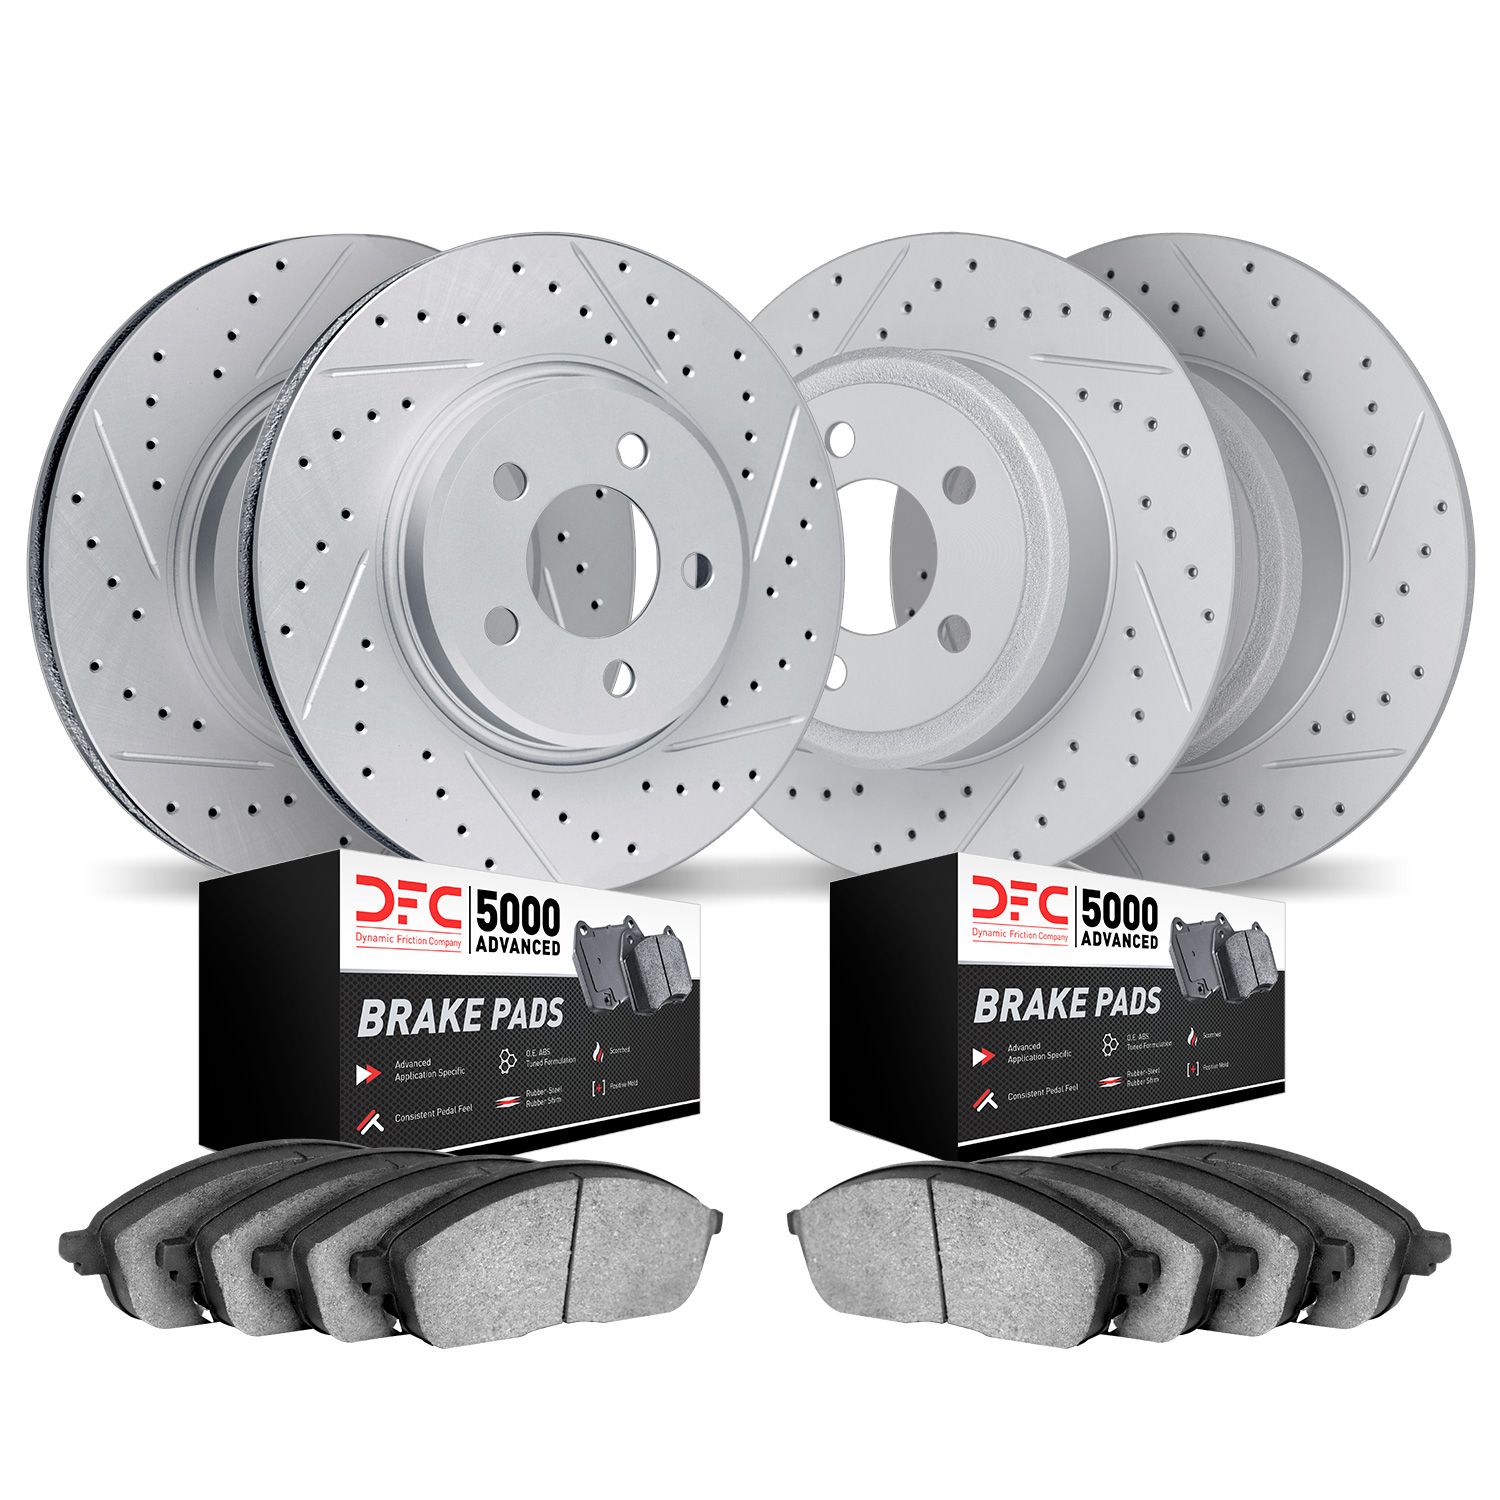 2504-76090 Geoperformance Drilled/Slotted Rotors w/5000 Advanced Brake Pads Kit, 2004-2004 Lexus/Toyota/Scion, Position: Front a